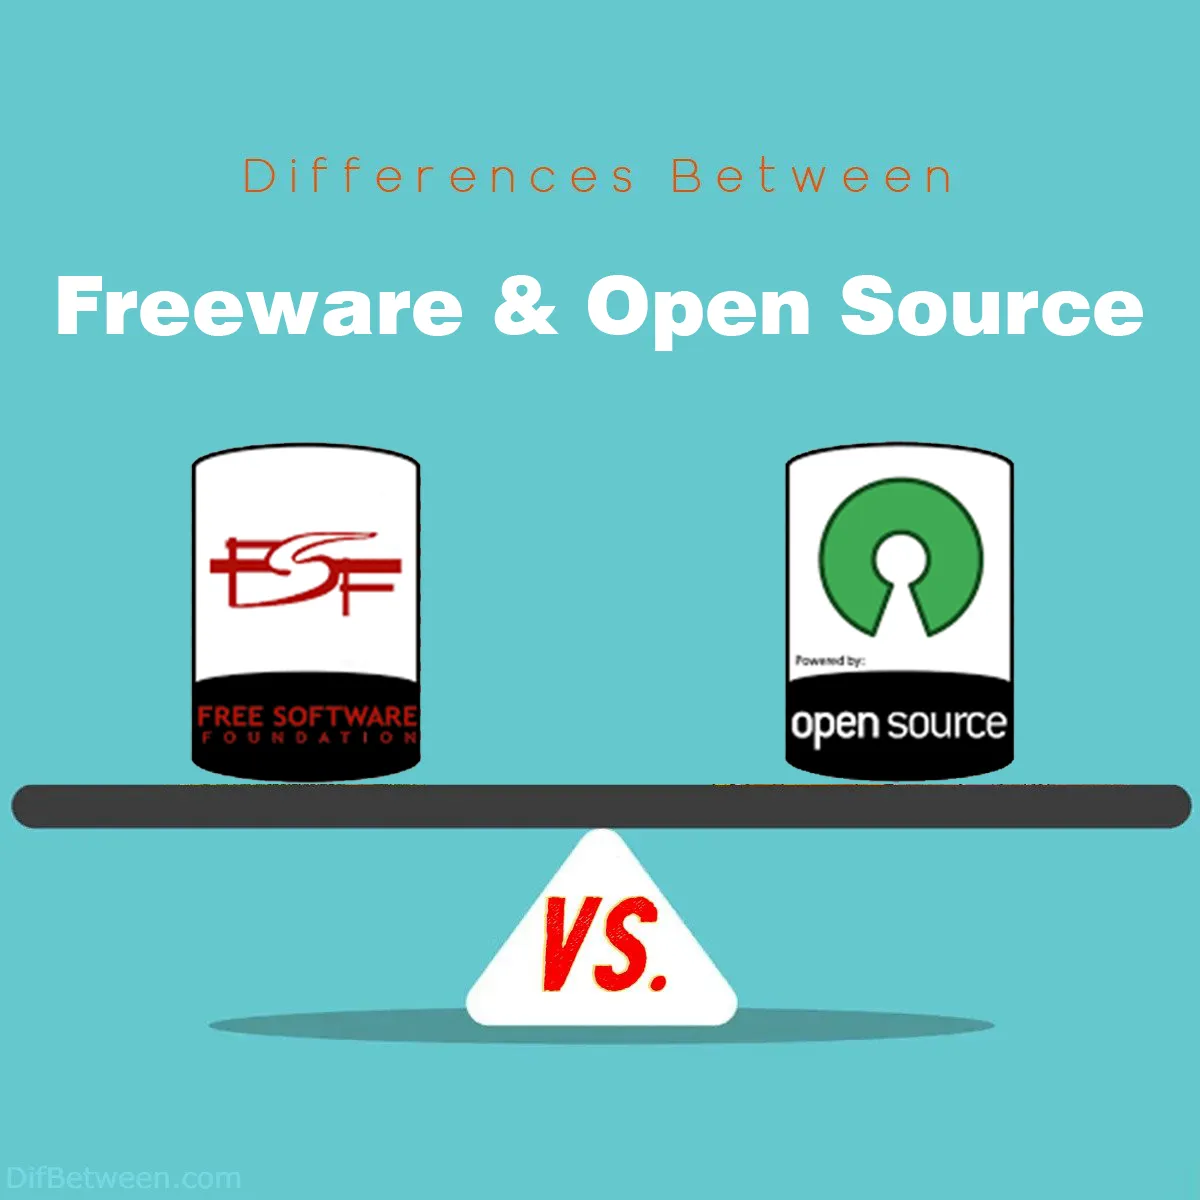 Differences Between Freeware and Open Source